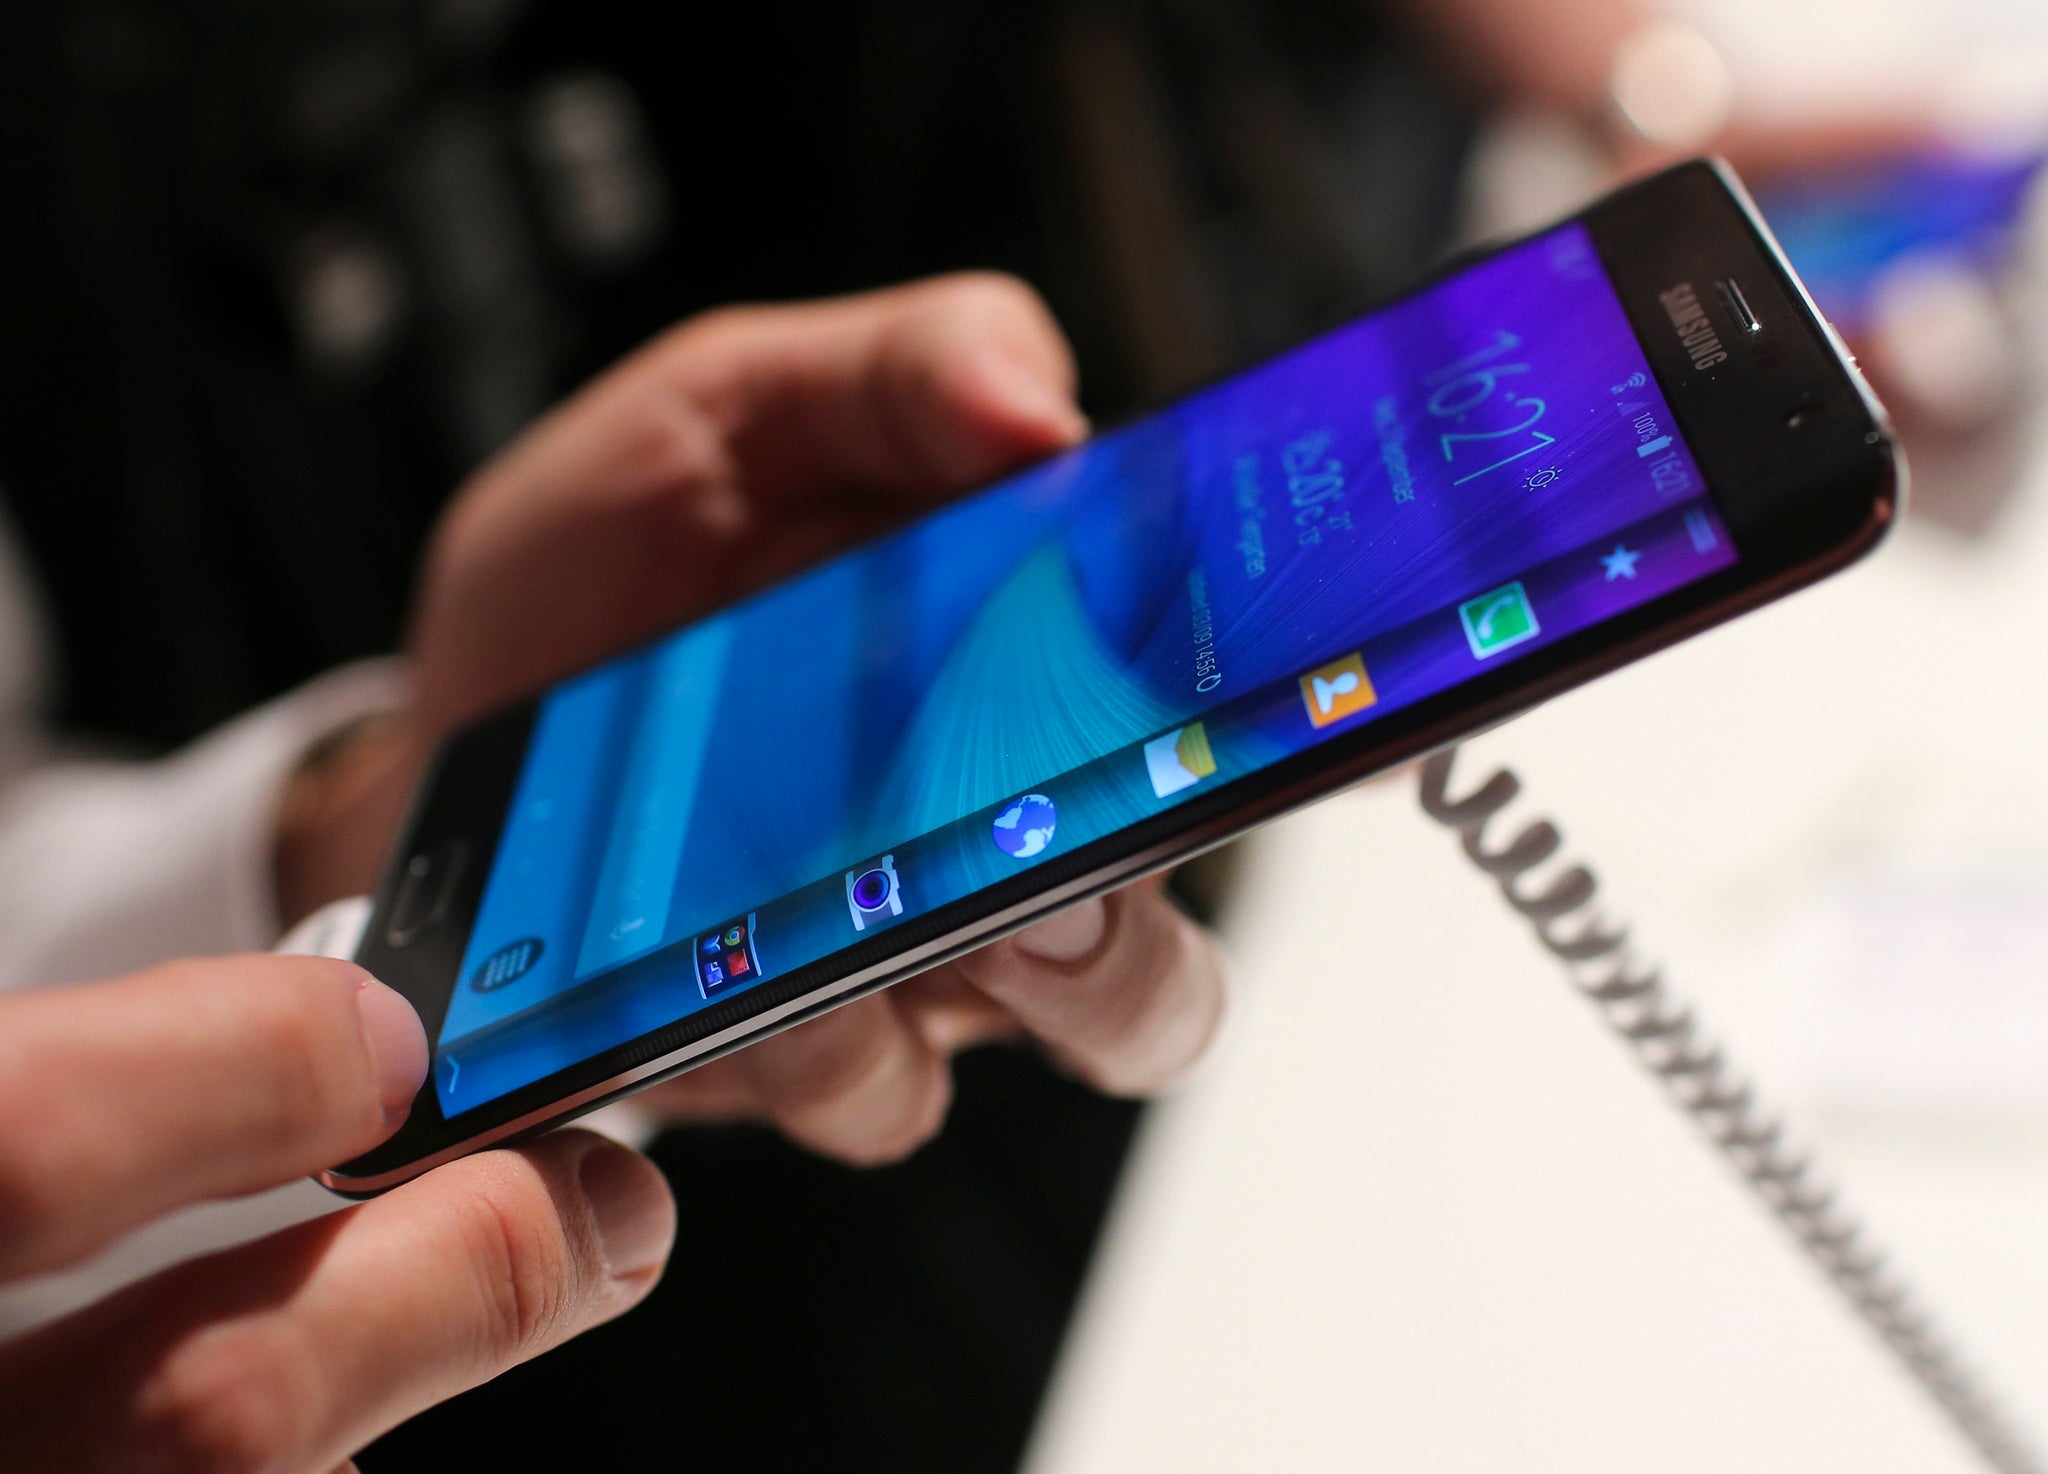 Samsung's Galaxy Note Edge (pictured) is one of the few smartphones that are 4G+ compatible.